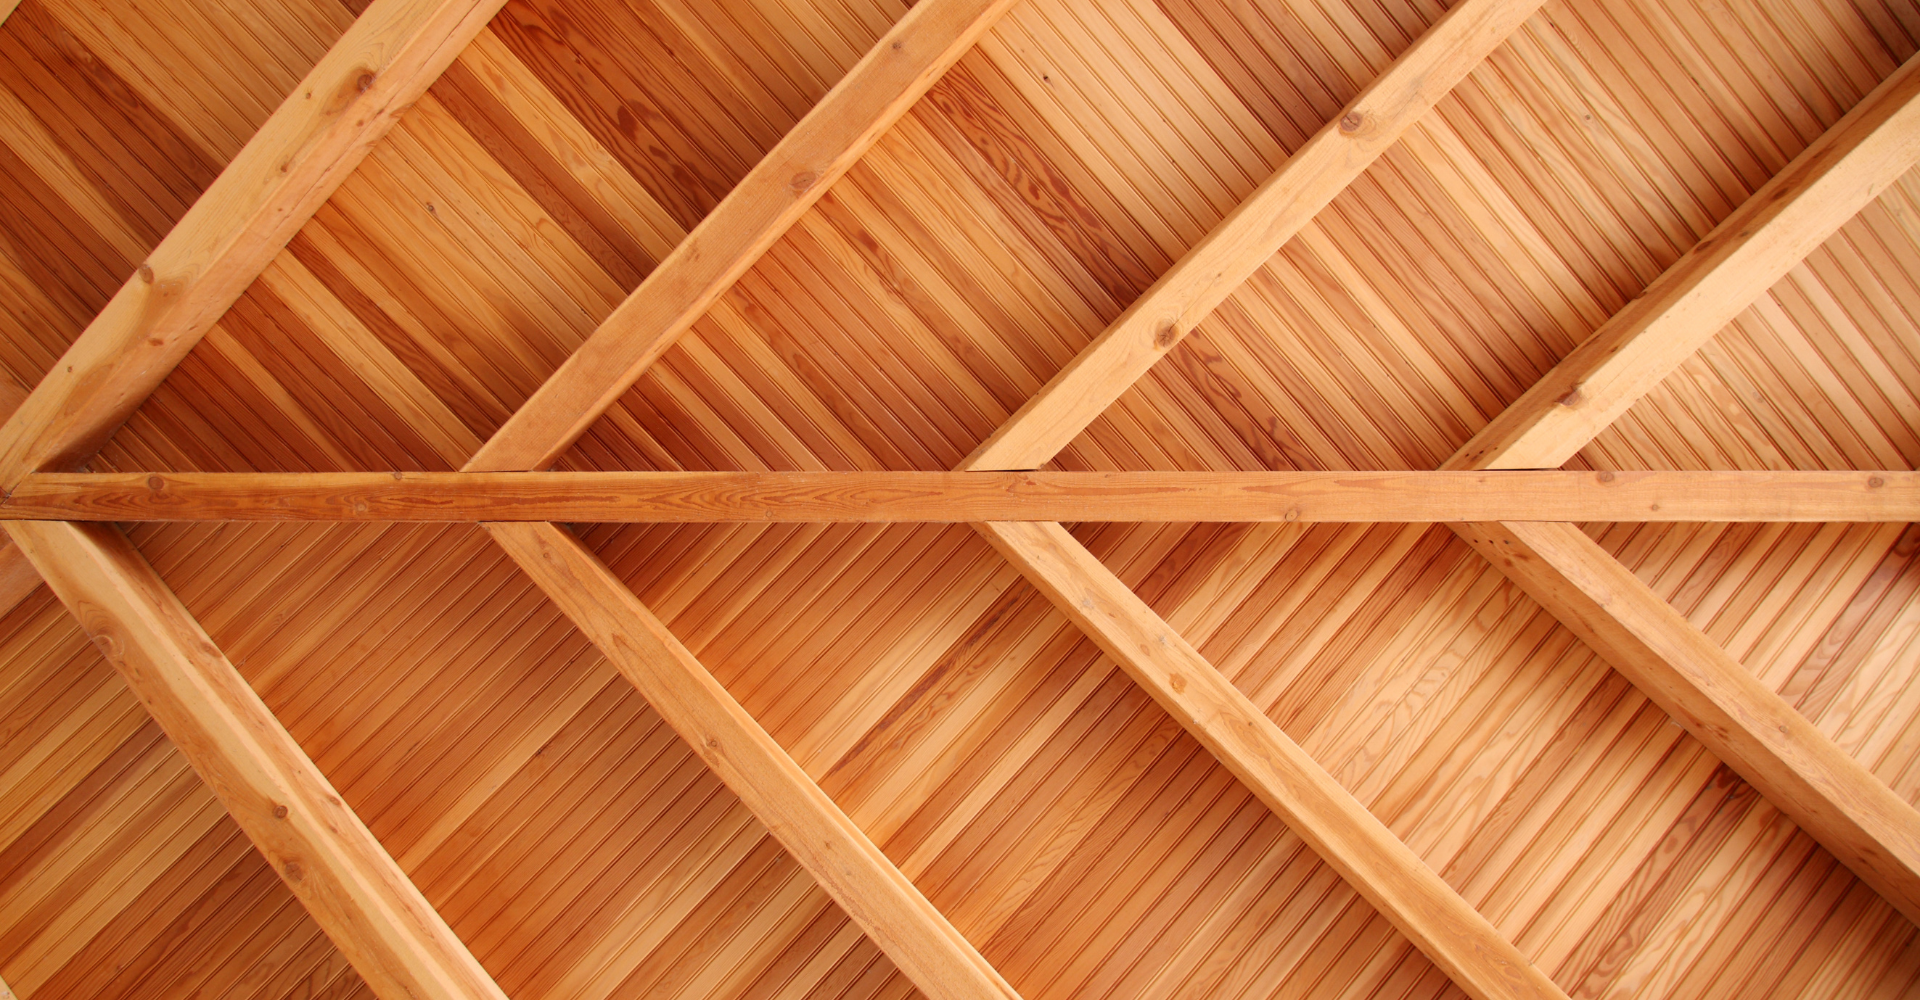 Popular Wood Choices for Tongue and Groove Ceilings